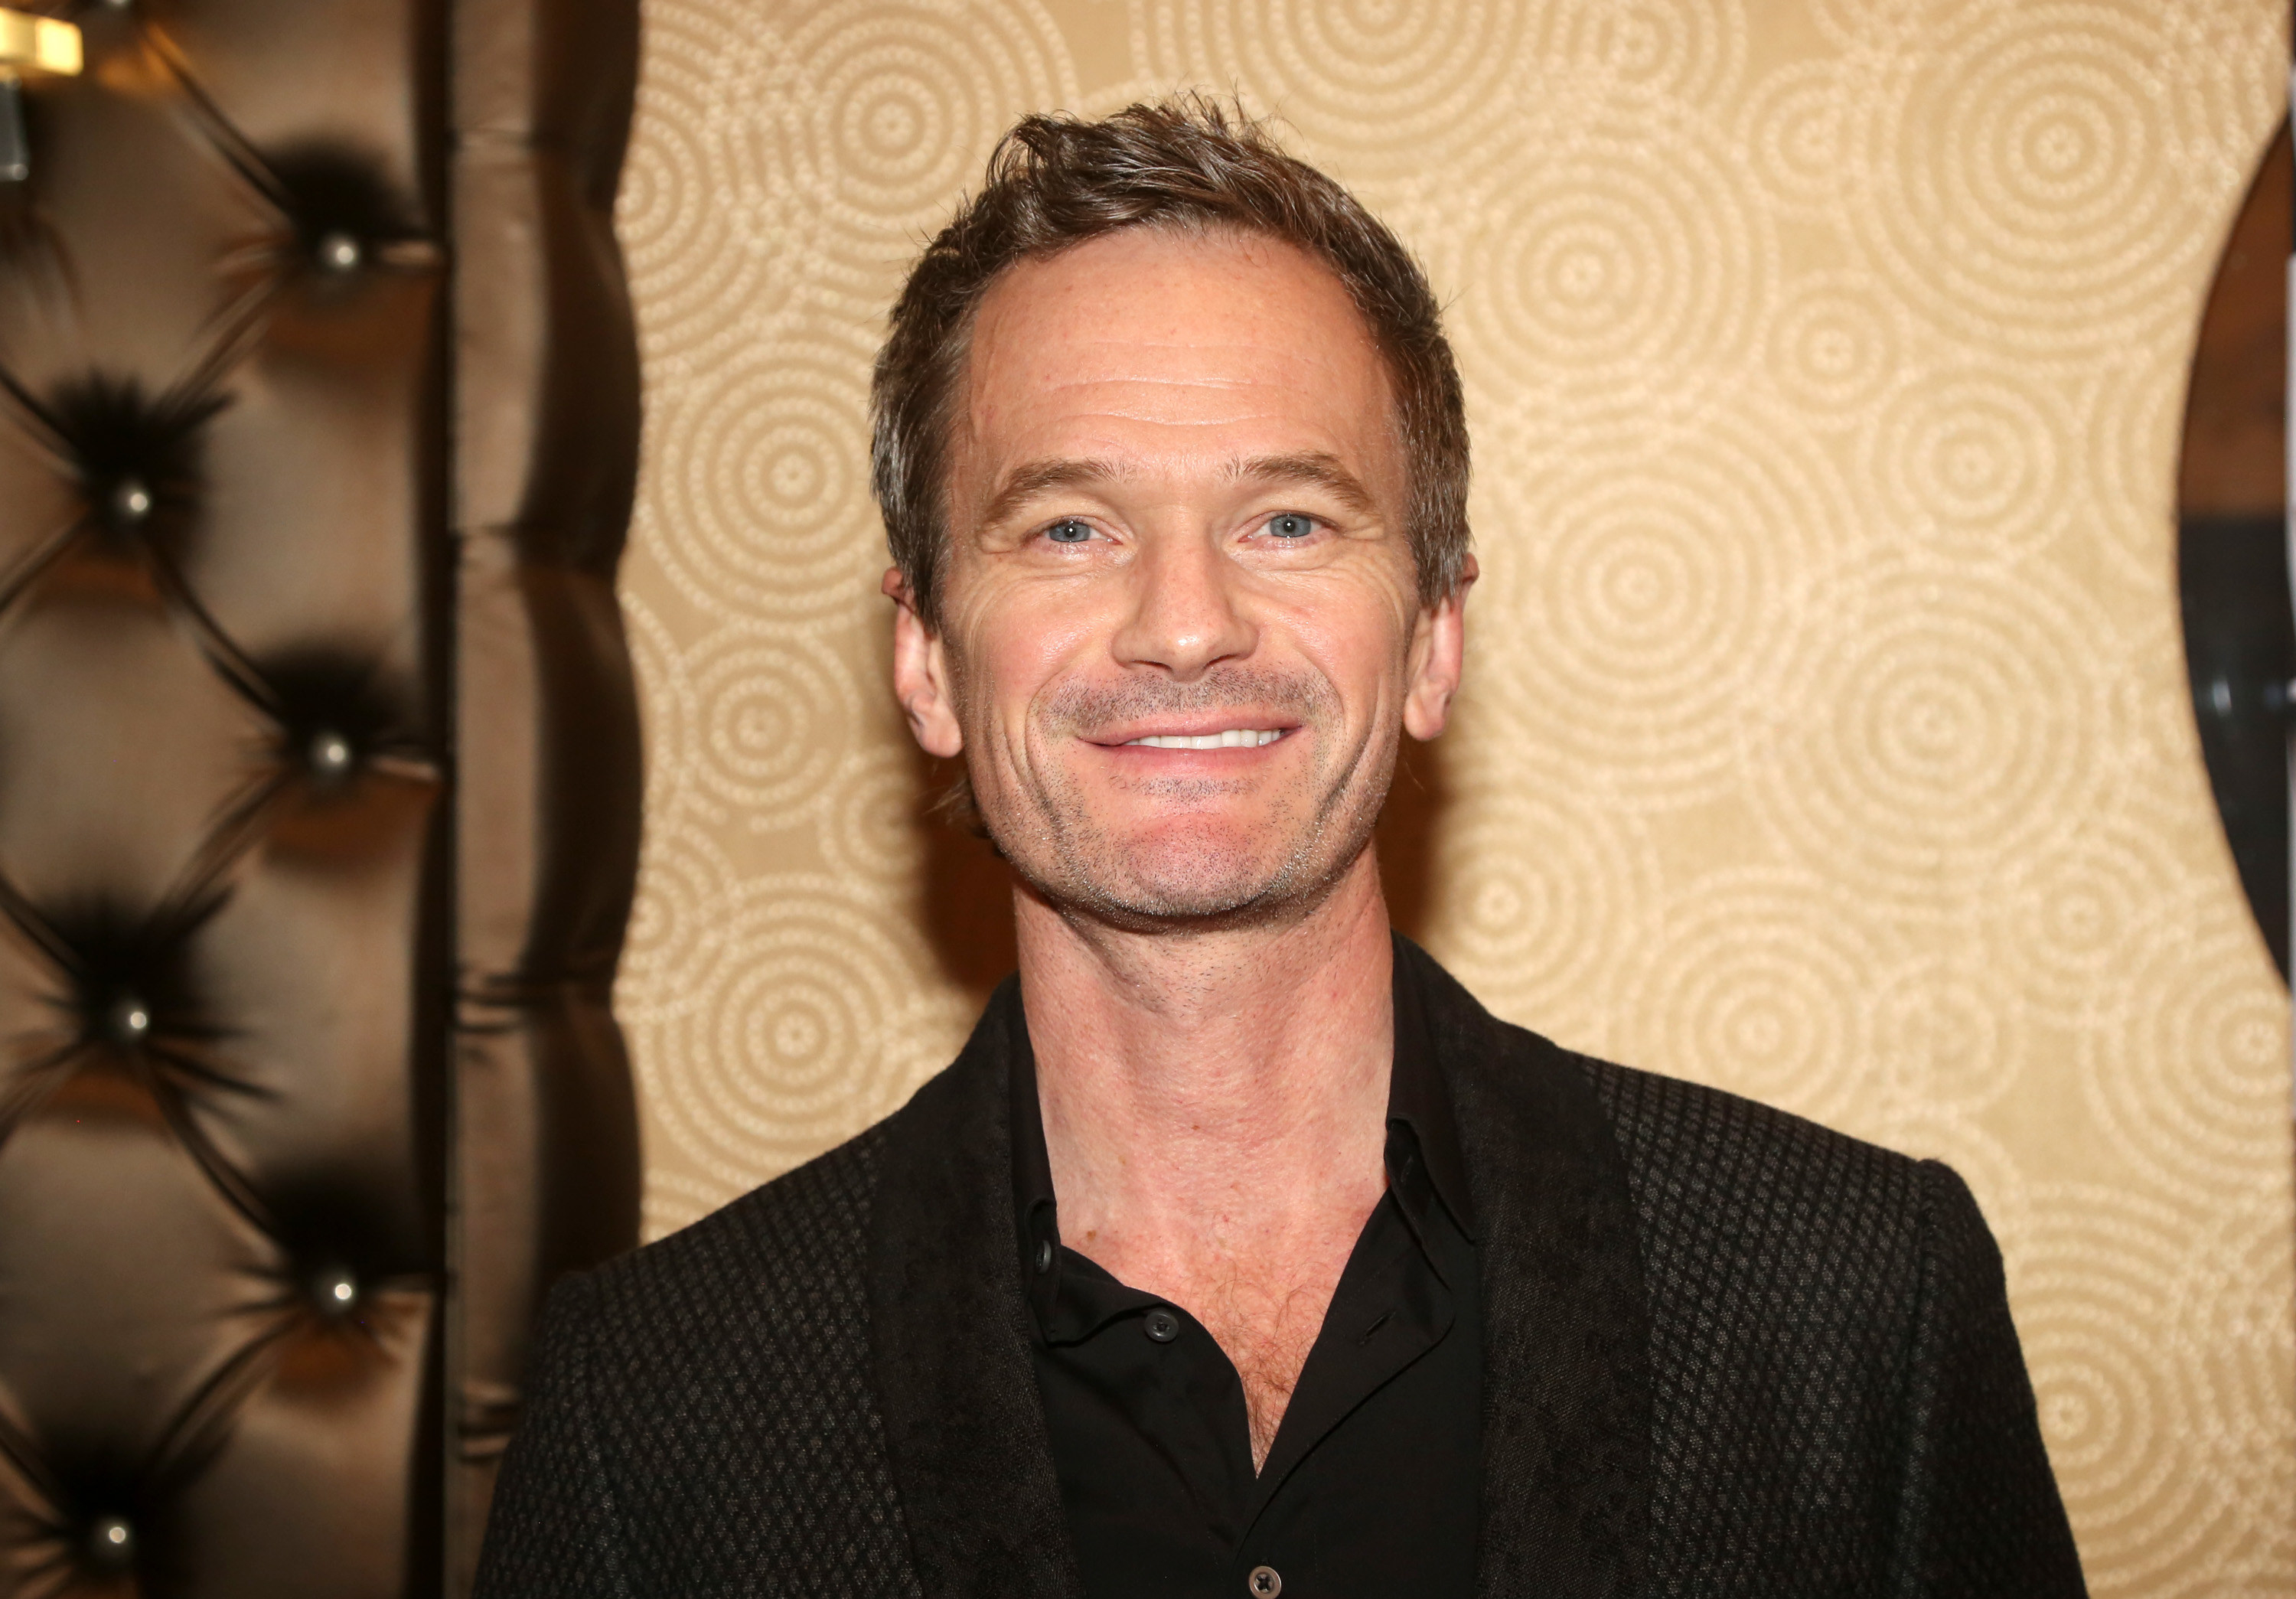 Neil Patrick Harris at an event